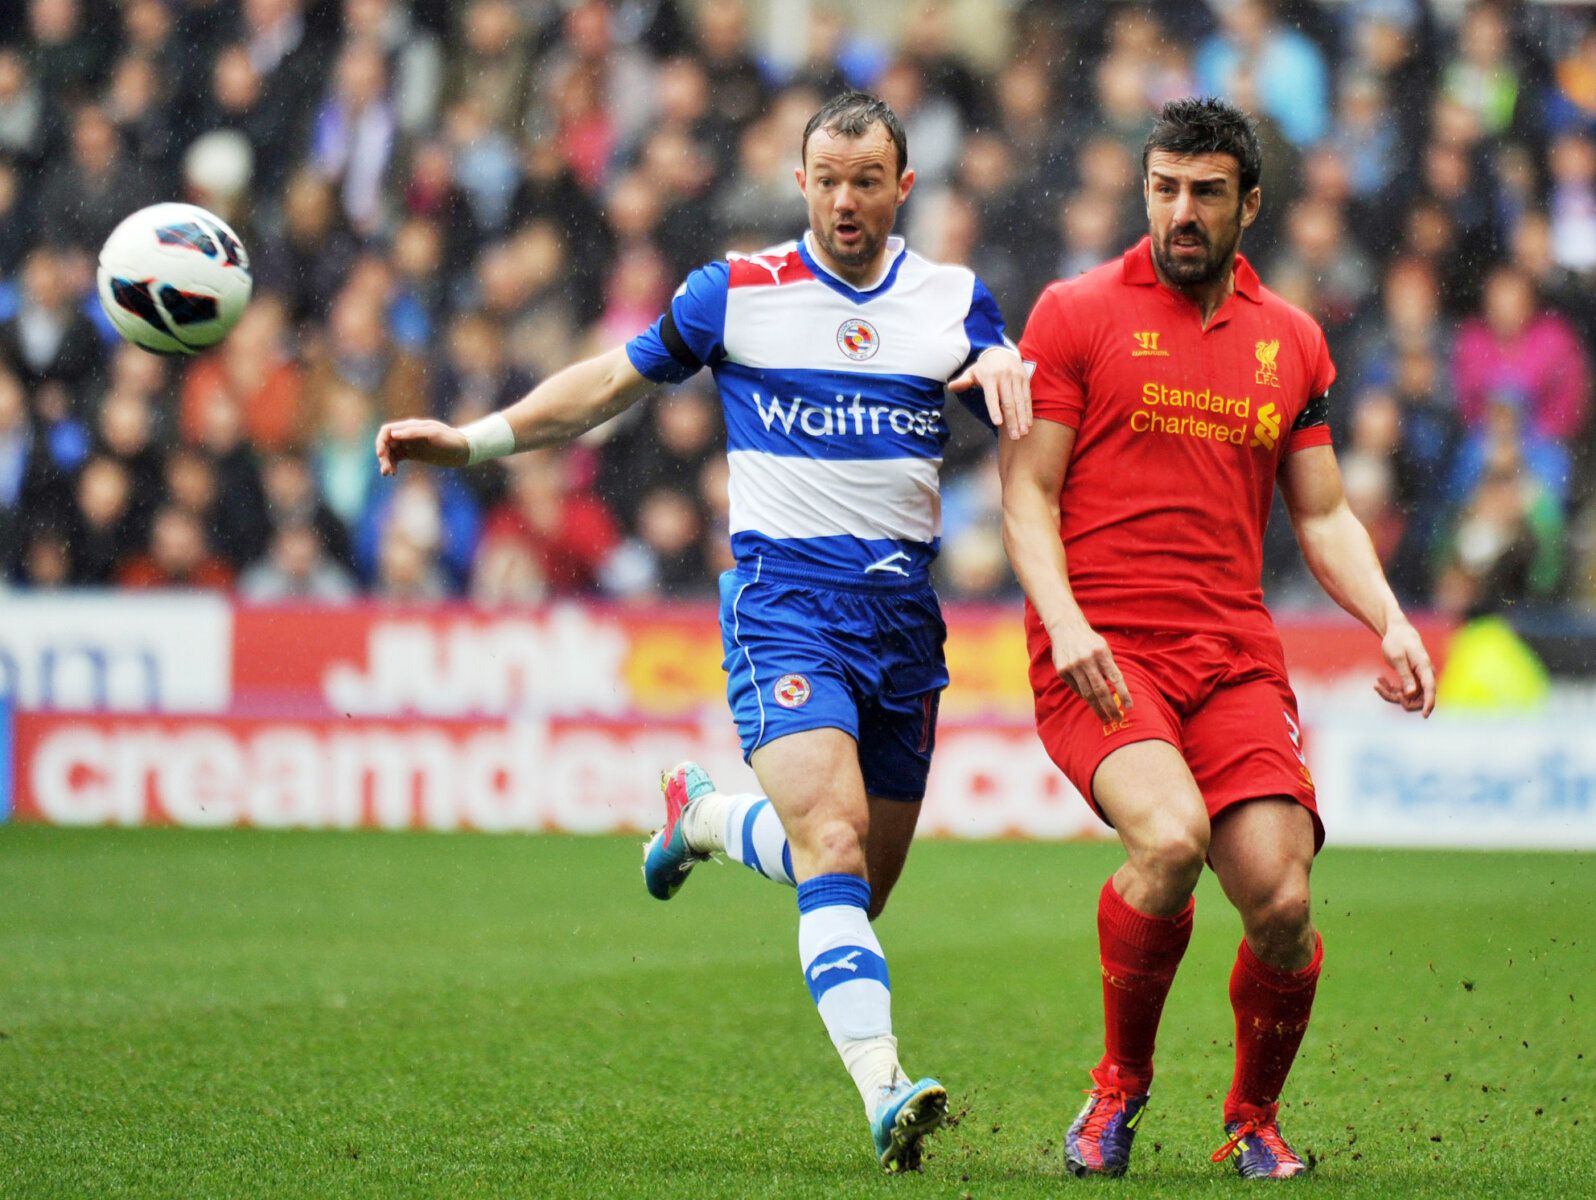 Football - Reading v Liverpool - Barclays Premier League  - The Madejski Stadium - 13/4/13 
Reading's Noel Hunt (L) in action with Liverpool's Jose Enrique 
Mandatory Credit: Action Images / Adam Holt 
Livepic 
EDITORIAL USE ONLY. No use with unauthorized audio, video, data, fixture lists, club/league logos or live services. Online in-match use limited to 45 images, no video emulation. No use in betting, games or single club/league/player publications.  Please contact your account representative